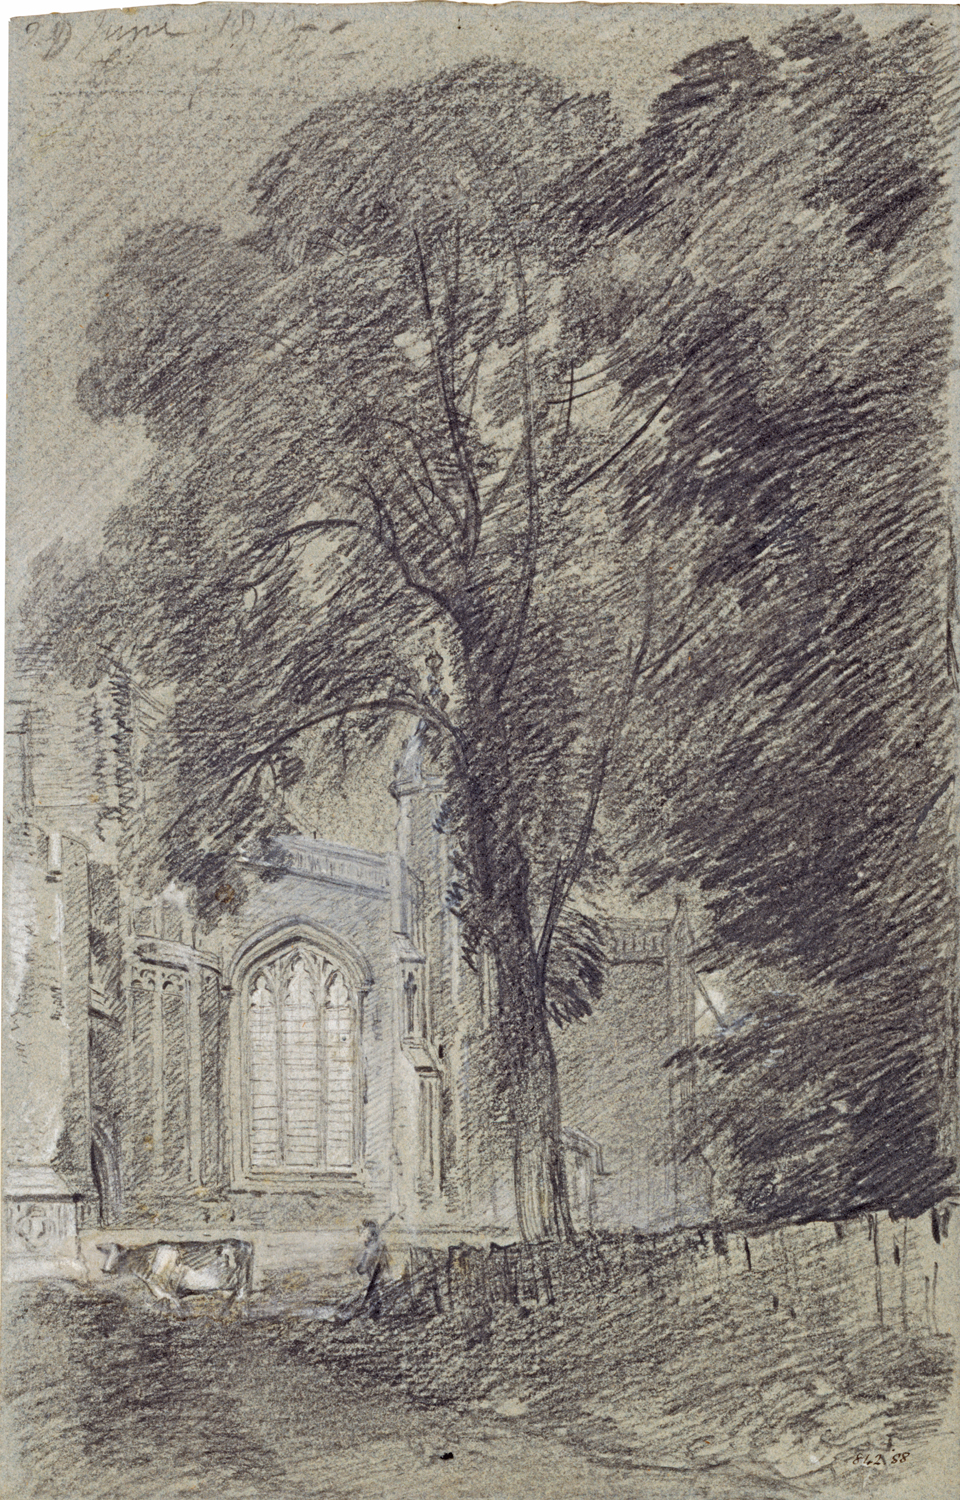 John Constable, East Bergholt Church: part of the west end seen beyond a group of elms, Suffolk, 1812, Black and white chalk on grey paper, Museum no. 842-1888